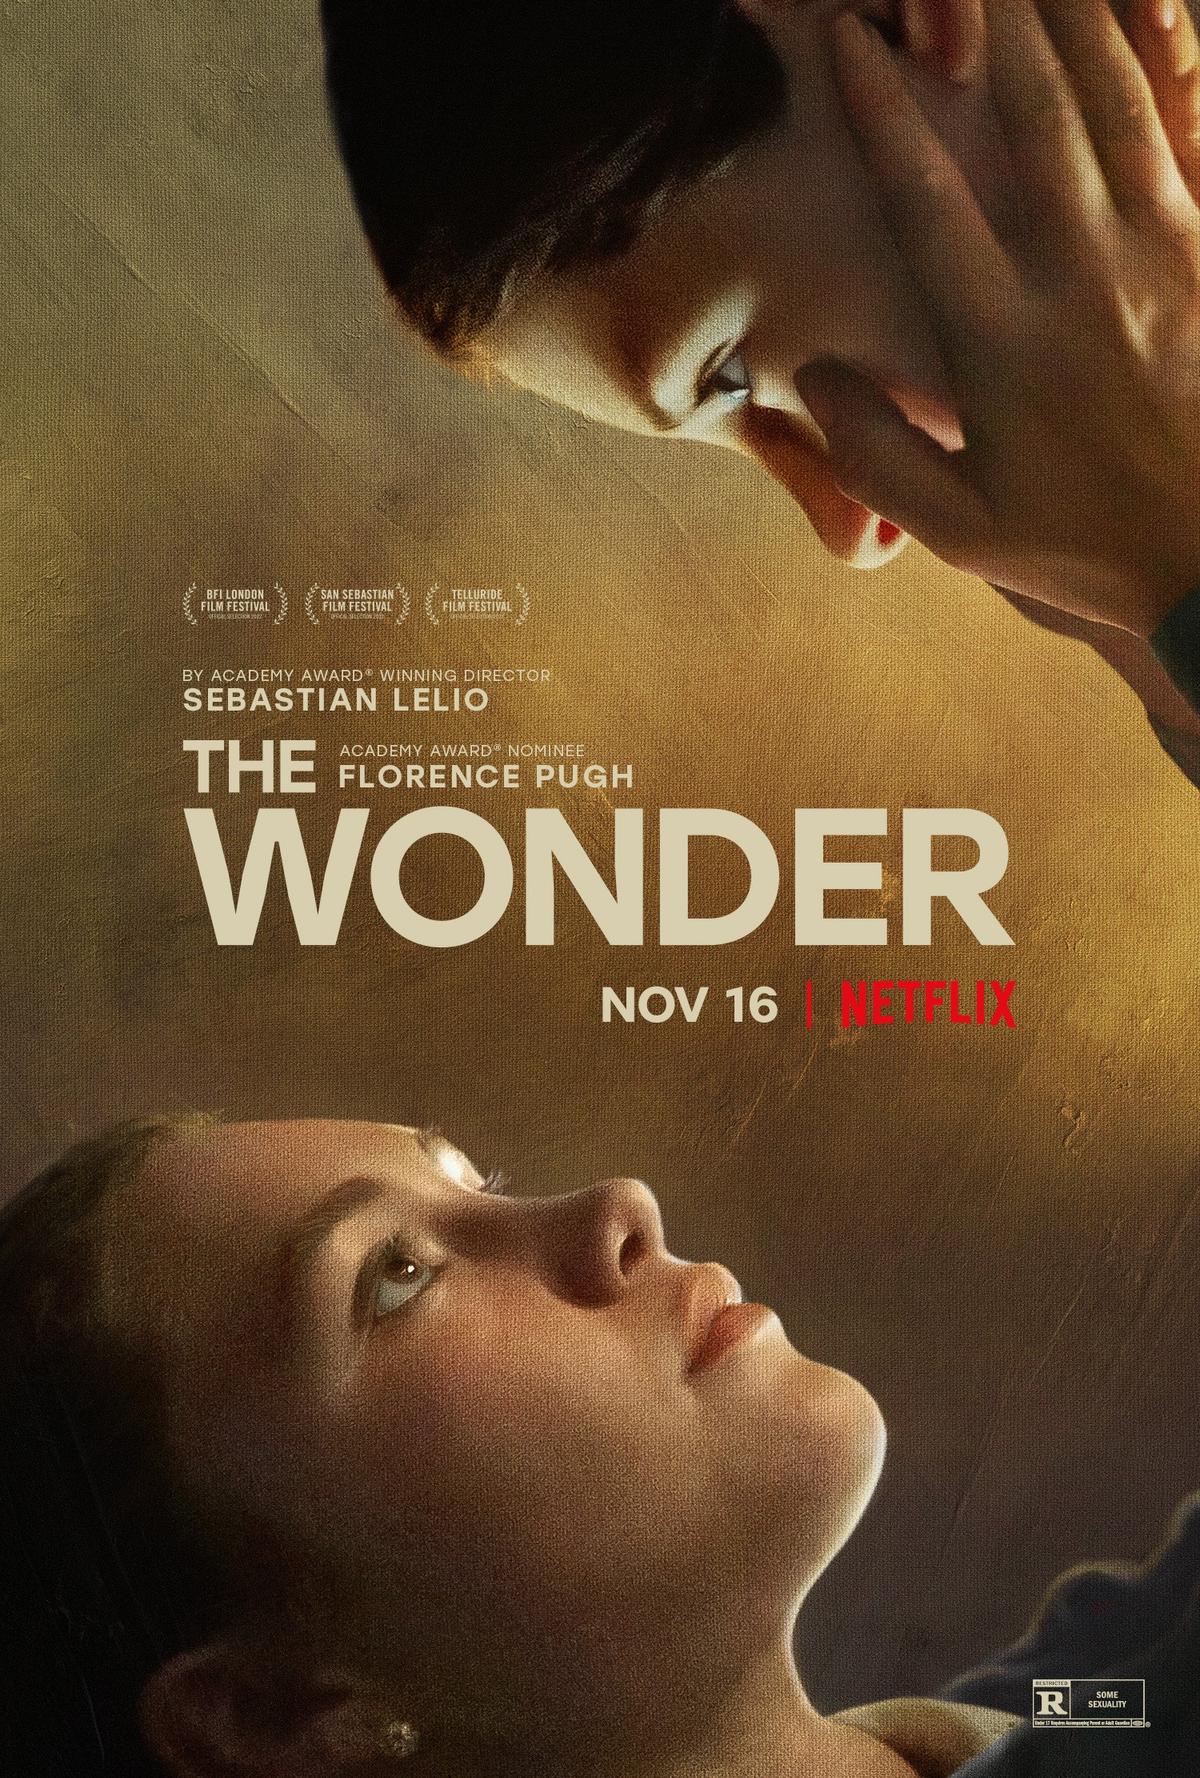 Movie poster for "The Wonder."